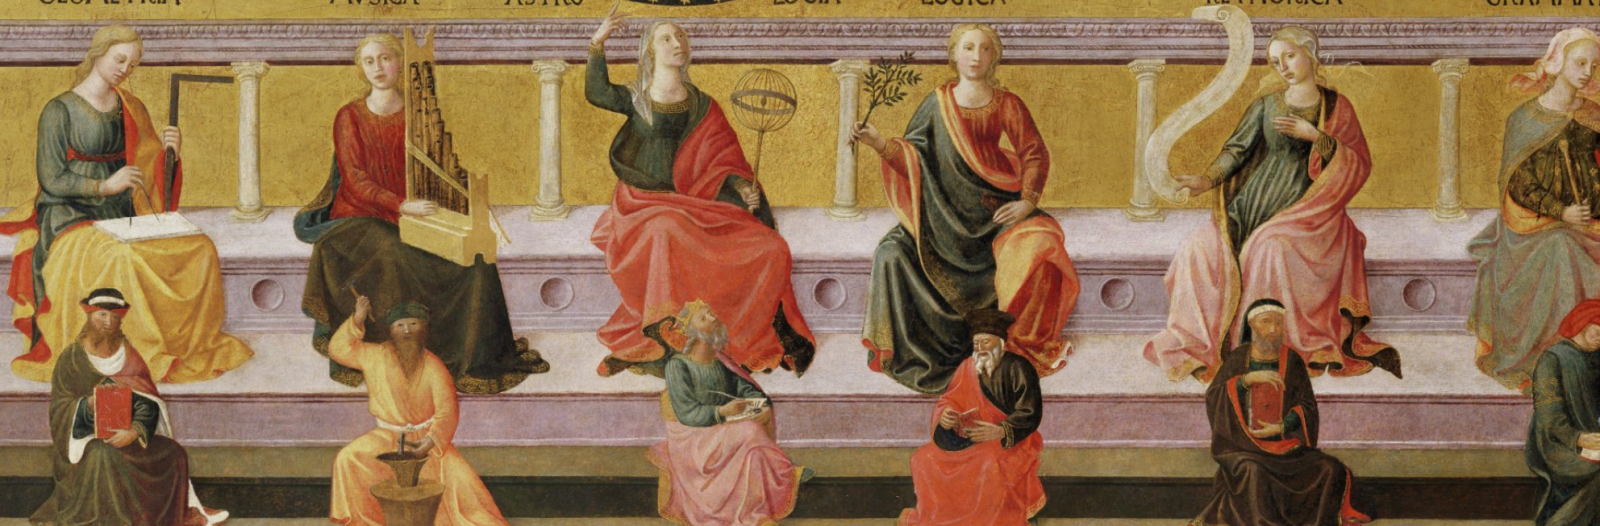 Seven Liberal Arts painting by Michelino, c. 1460